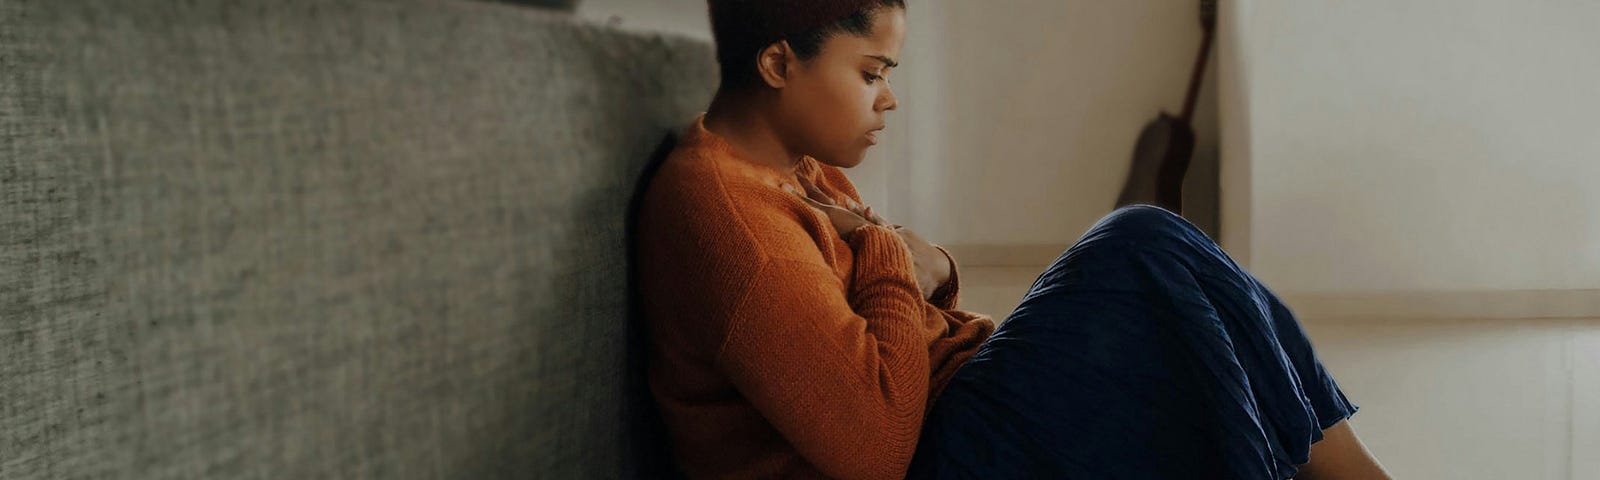 A girl sitting on the floor behind a couch and looking sad or anxious.